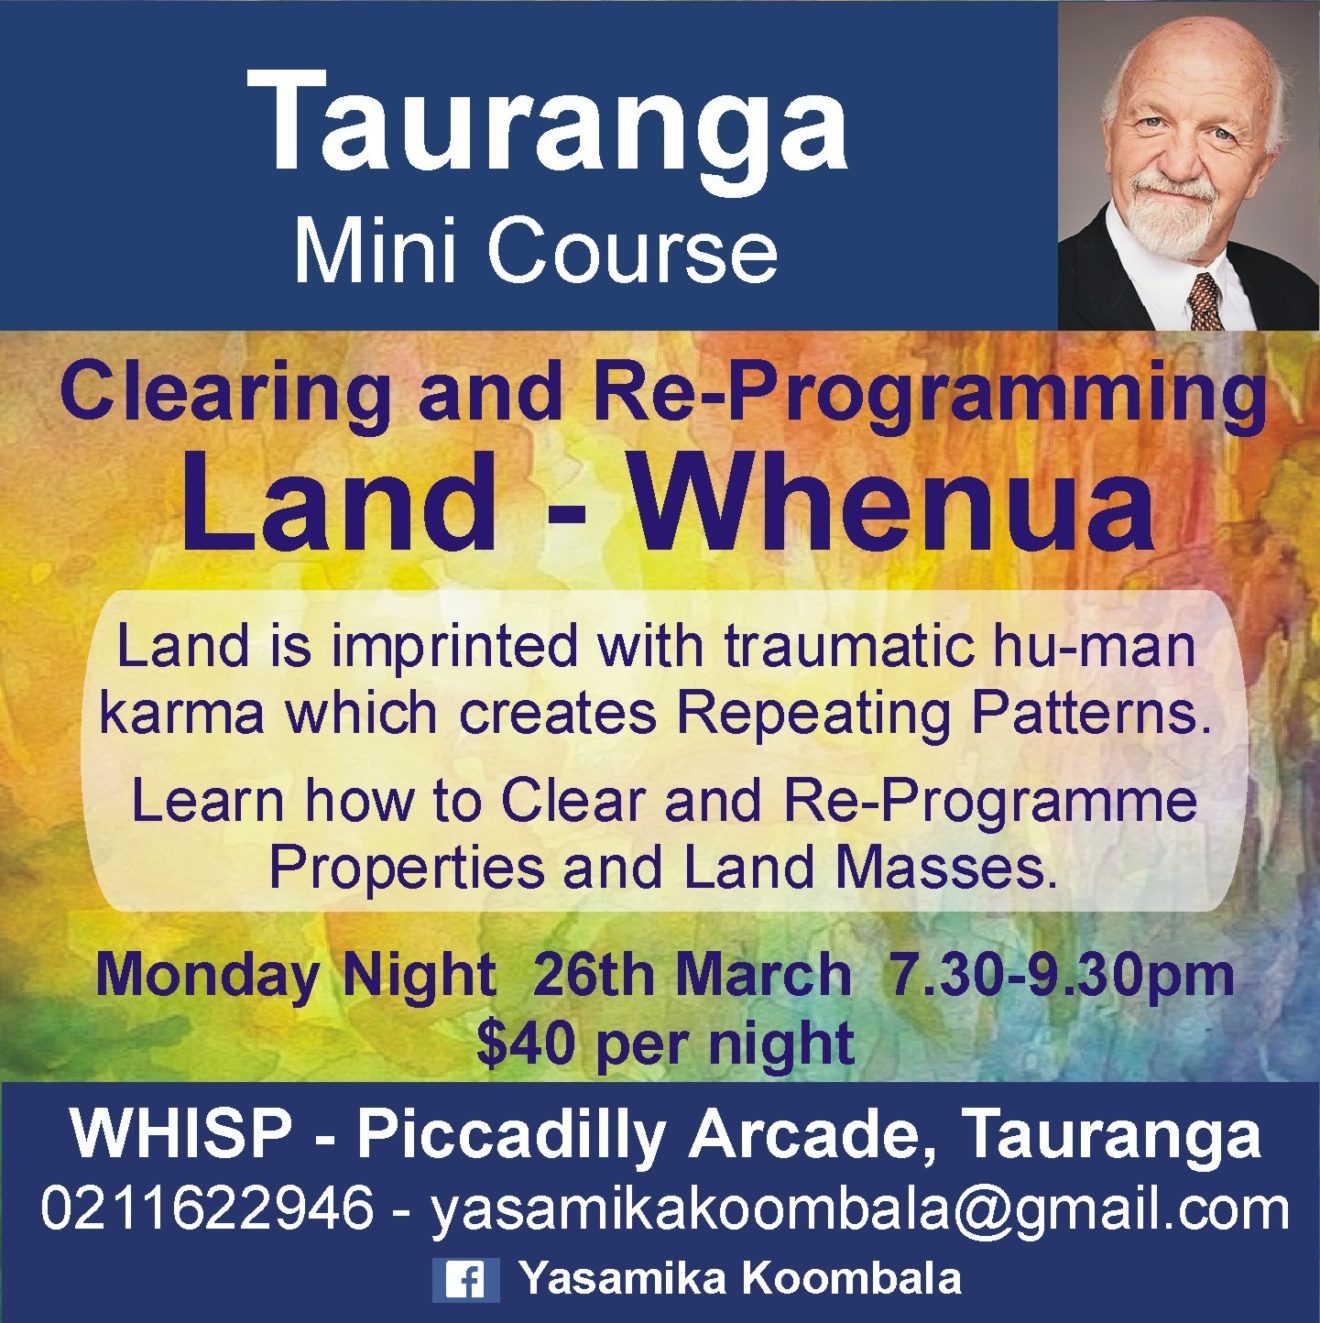 LAND - WHENUA CLEARING and REPROGRAMMING